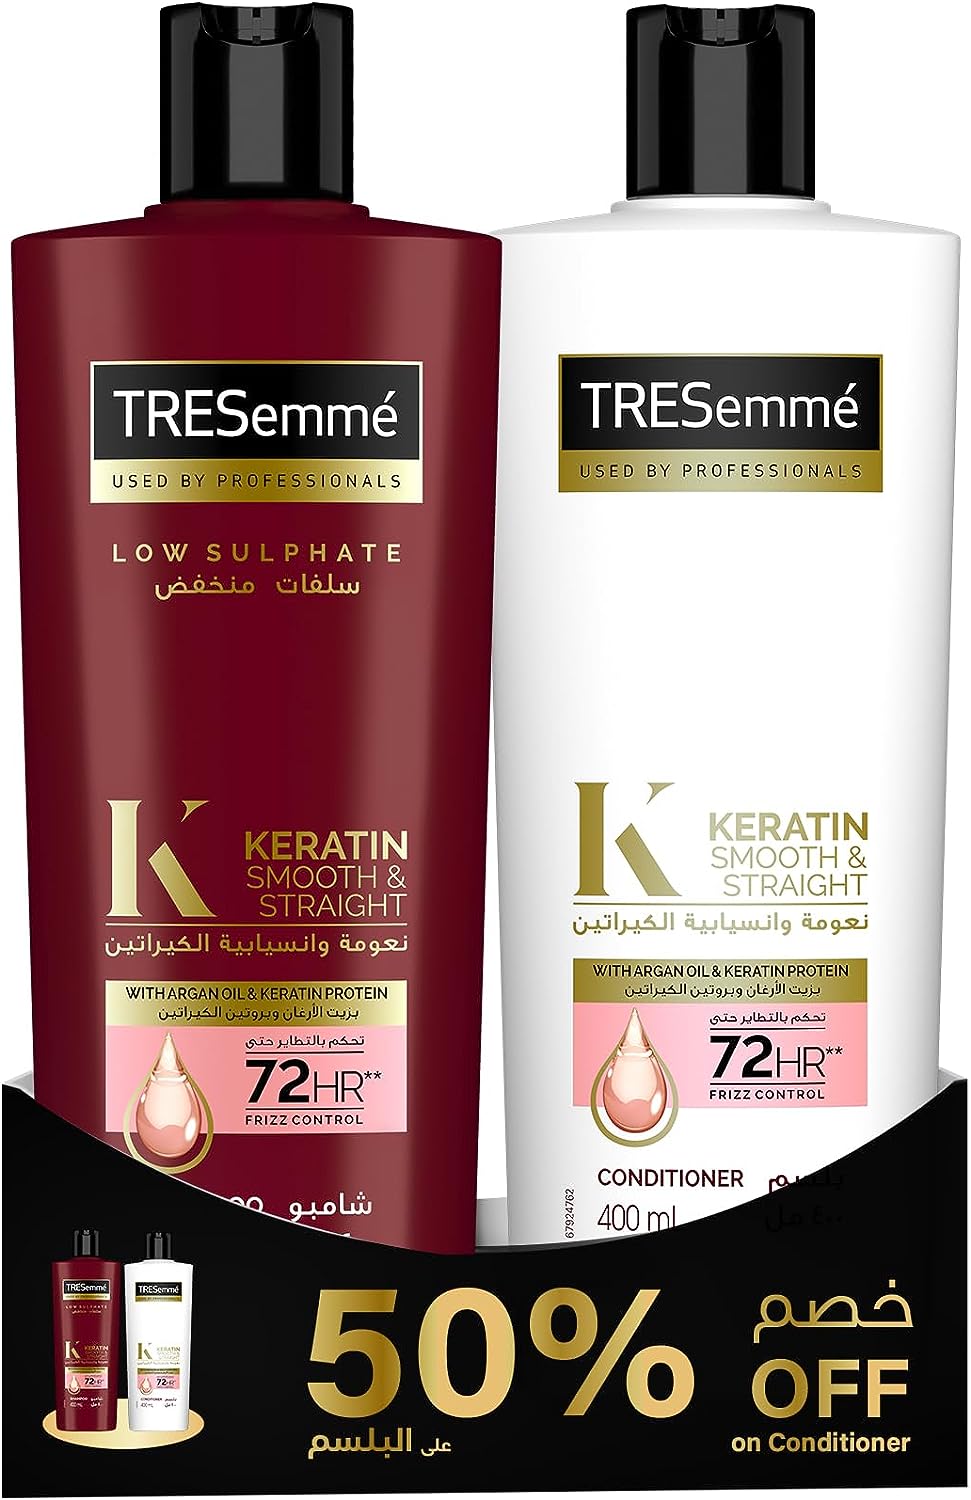 TRESEMME SHAMP + COND 50% OFF